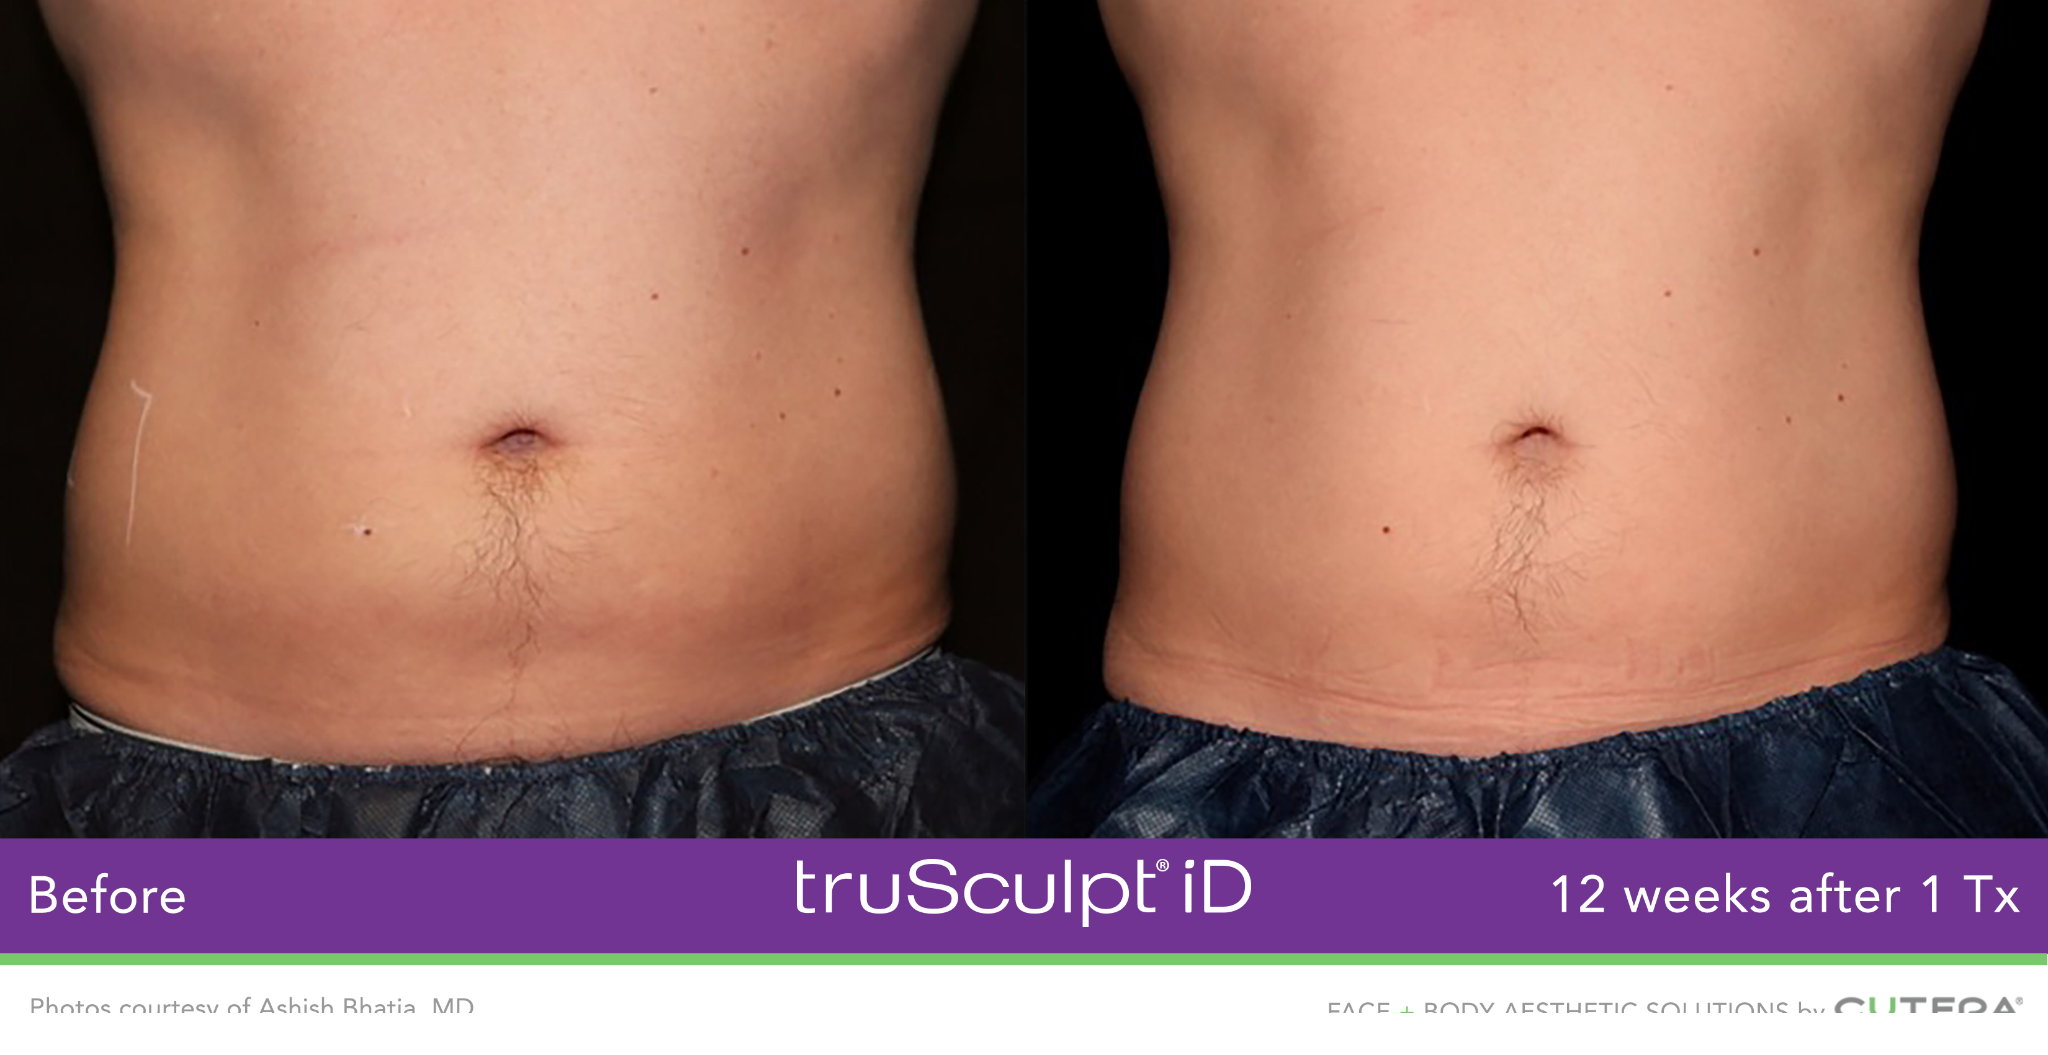 Body Sculpting: What is it & How Does it Work? – Introlift Medical Spa,  Sculpting 